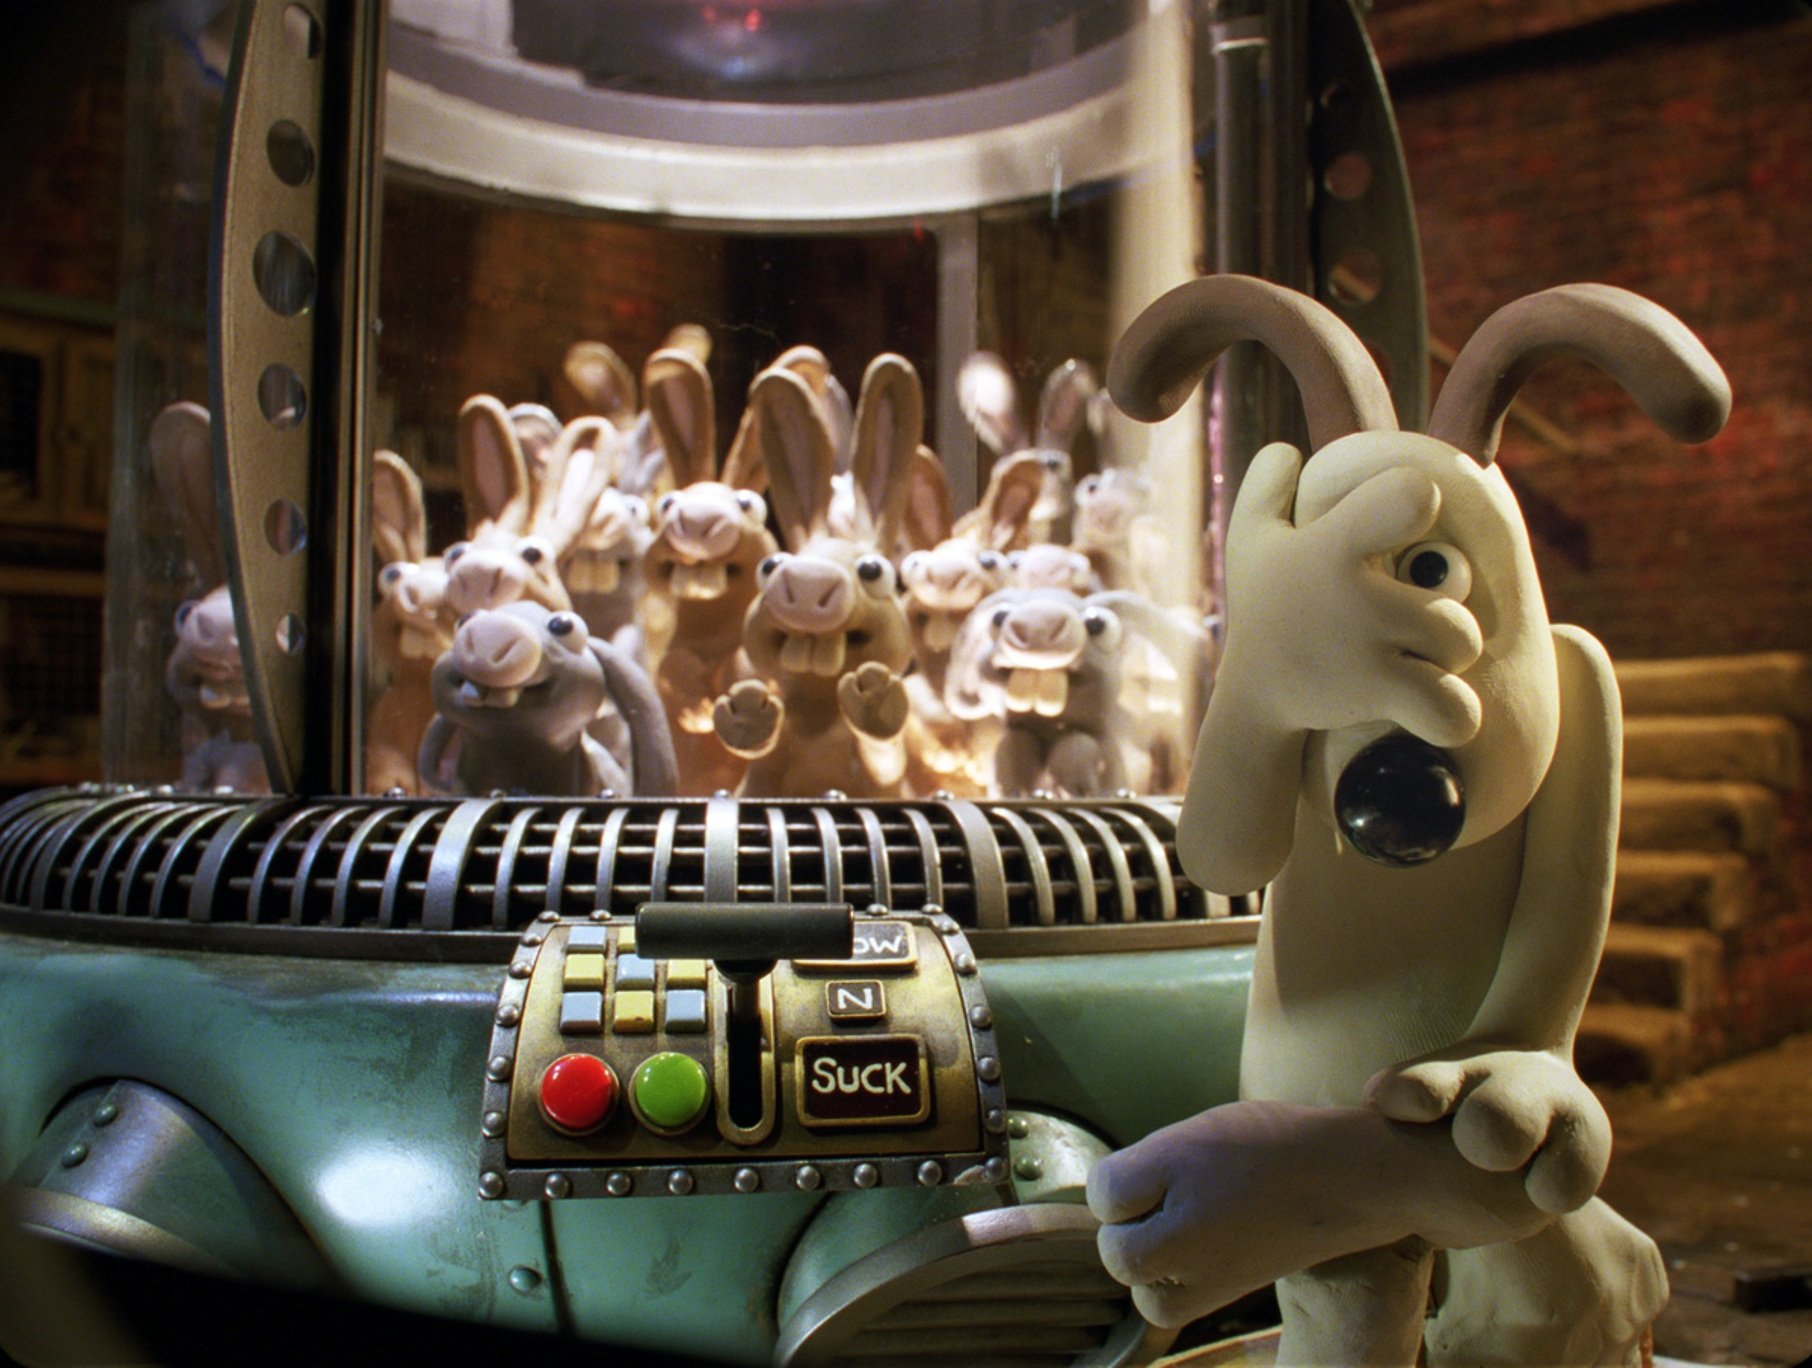 wallace, Gromit, Comedy, Animation, Family, Adventure Wallpaper